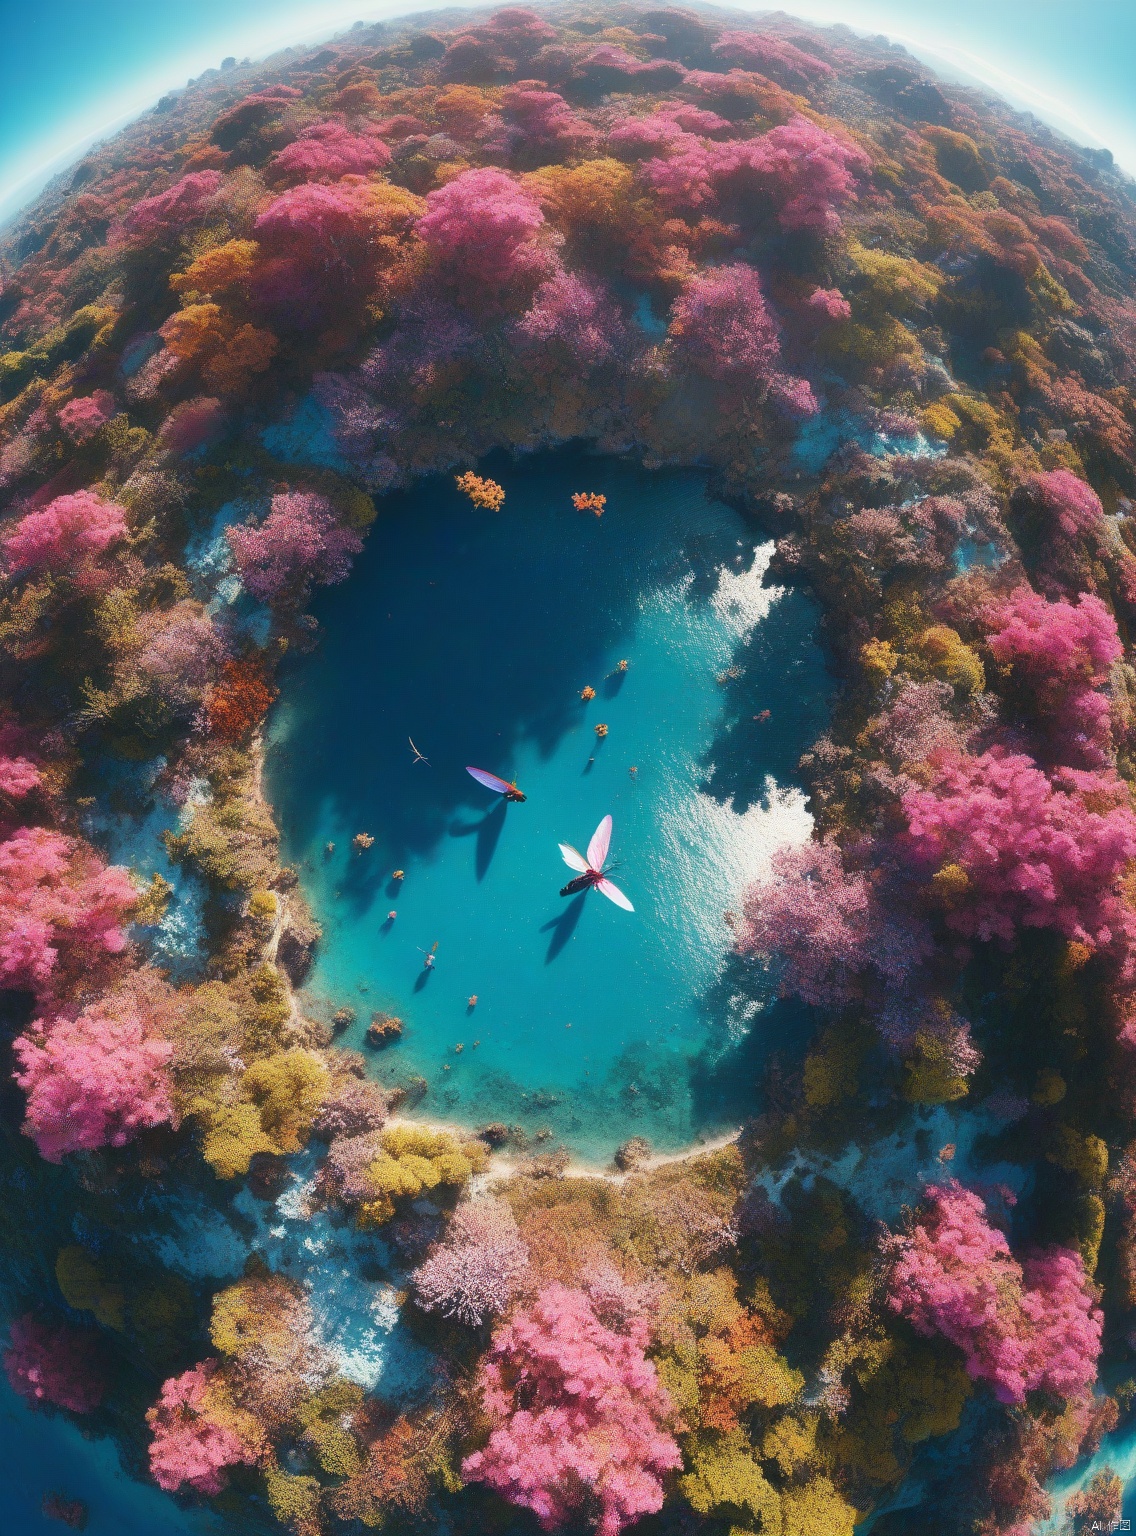  High-quality, masterpieceuniverse,there are large pink vegetation, colorful vegetation and blue ocean and atmosphere on the surface of a planet,Insects with huge wings are flying in the sky.true style, film quality.Gorgeous, colorful, detailed and meticulous light and shadow.Super wide angle